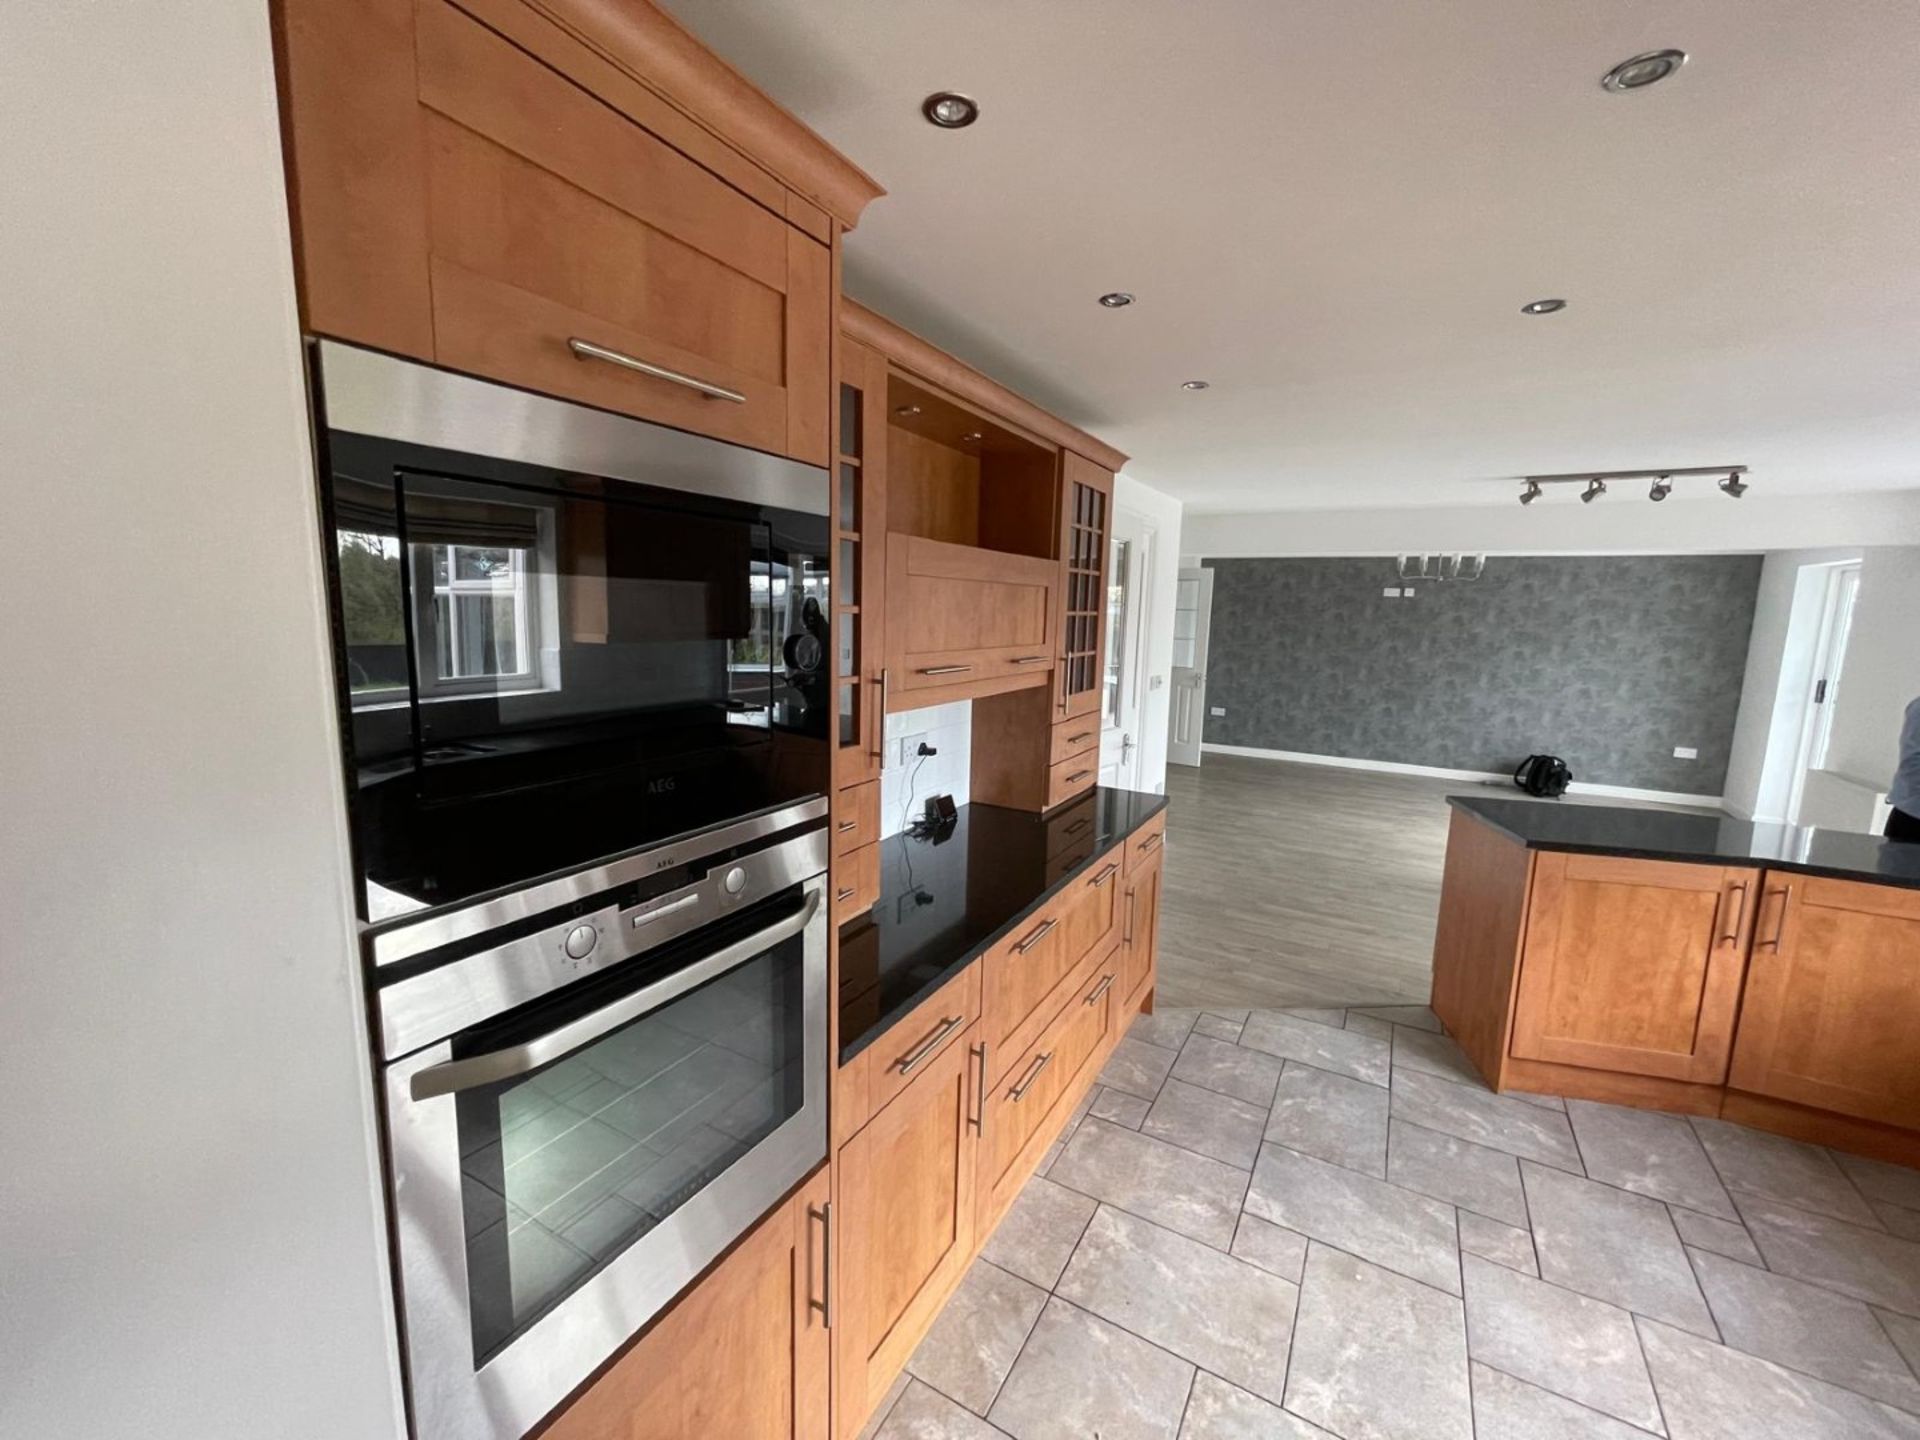 1 x Shaker-style, Feature-rich Fitted Kitchen with Solid Wood Doors, Granite Worktops and Appliances - Image 31 of 111